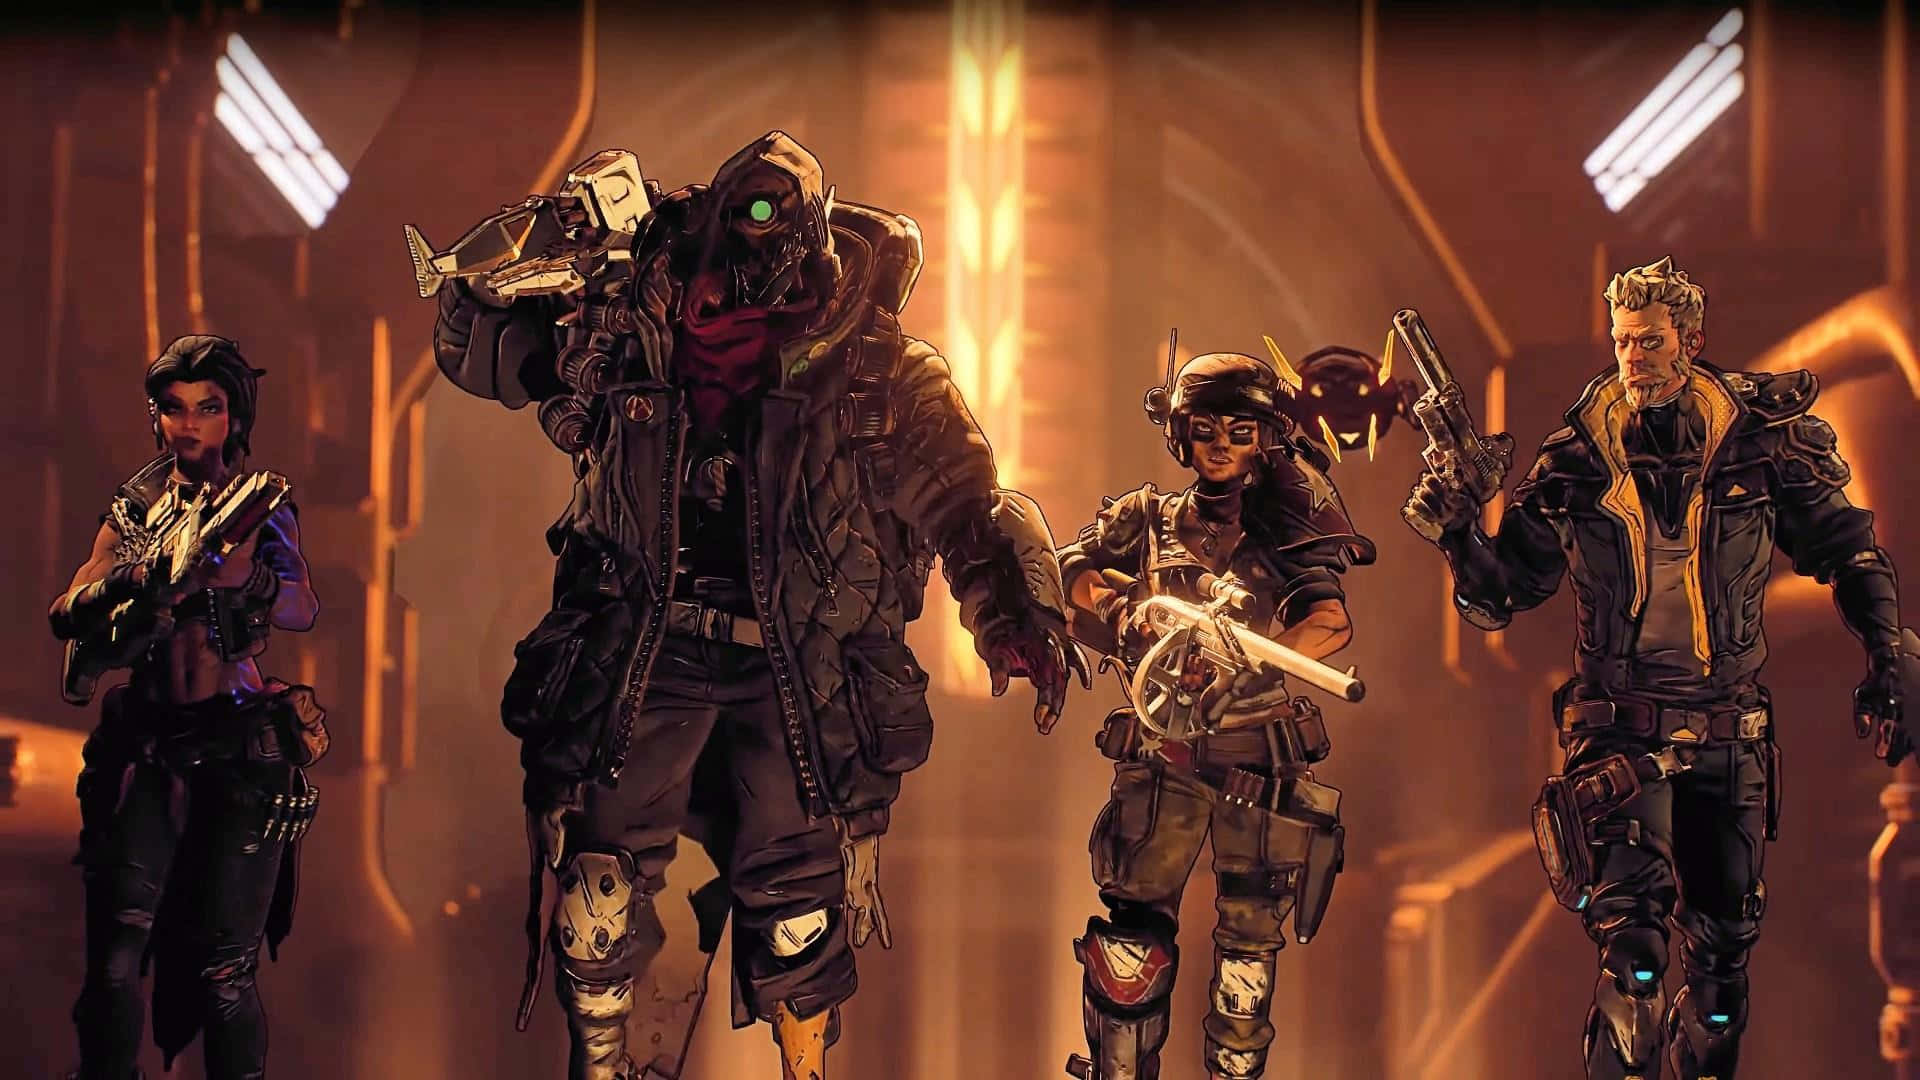 Grab your gun and join the fight in Borderlands 3